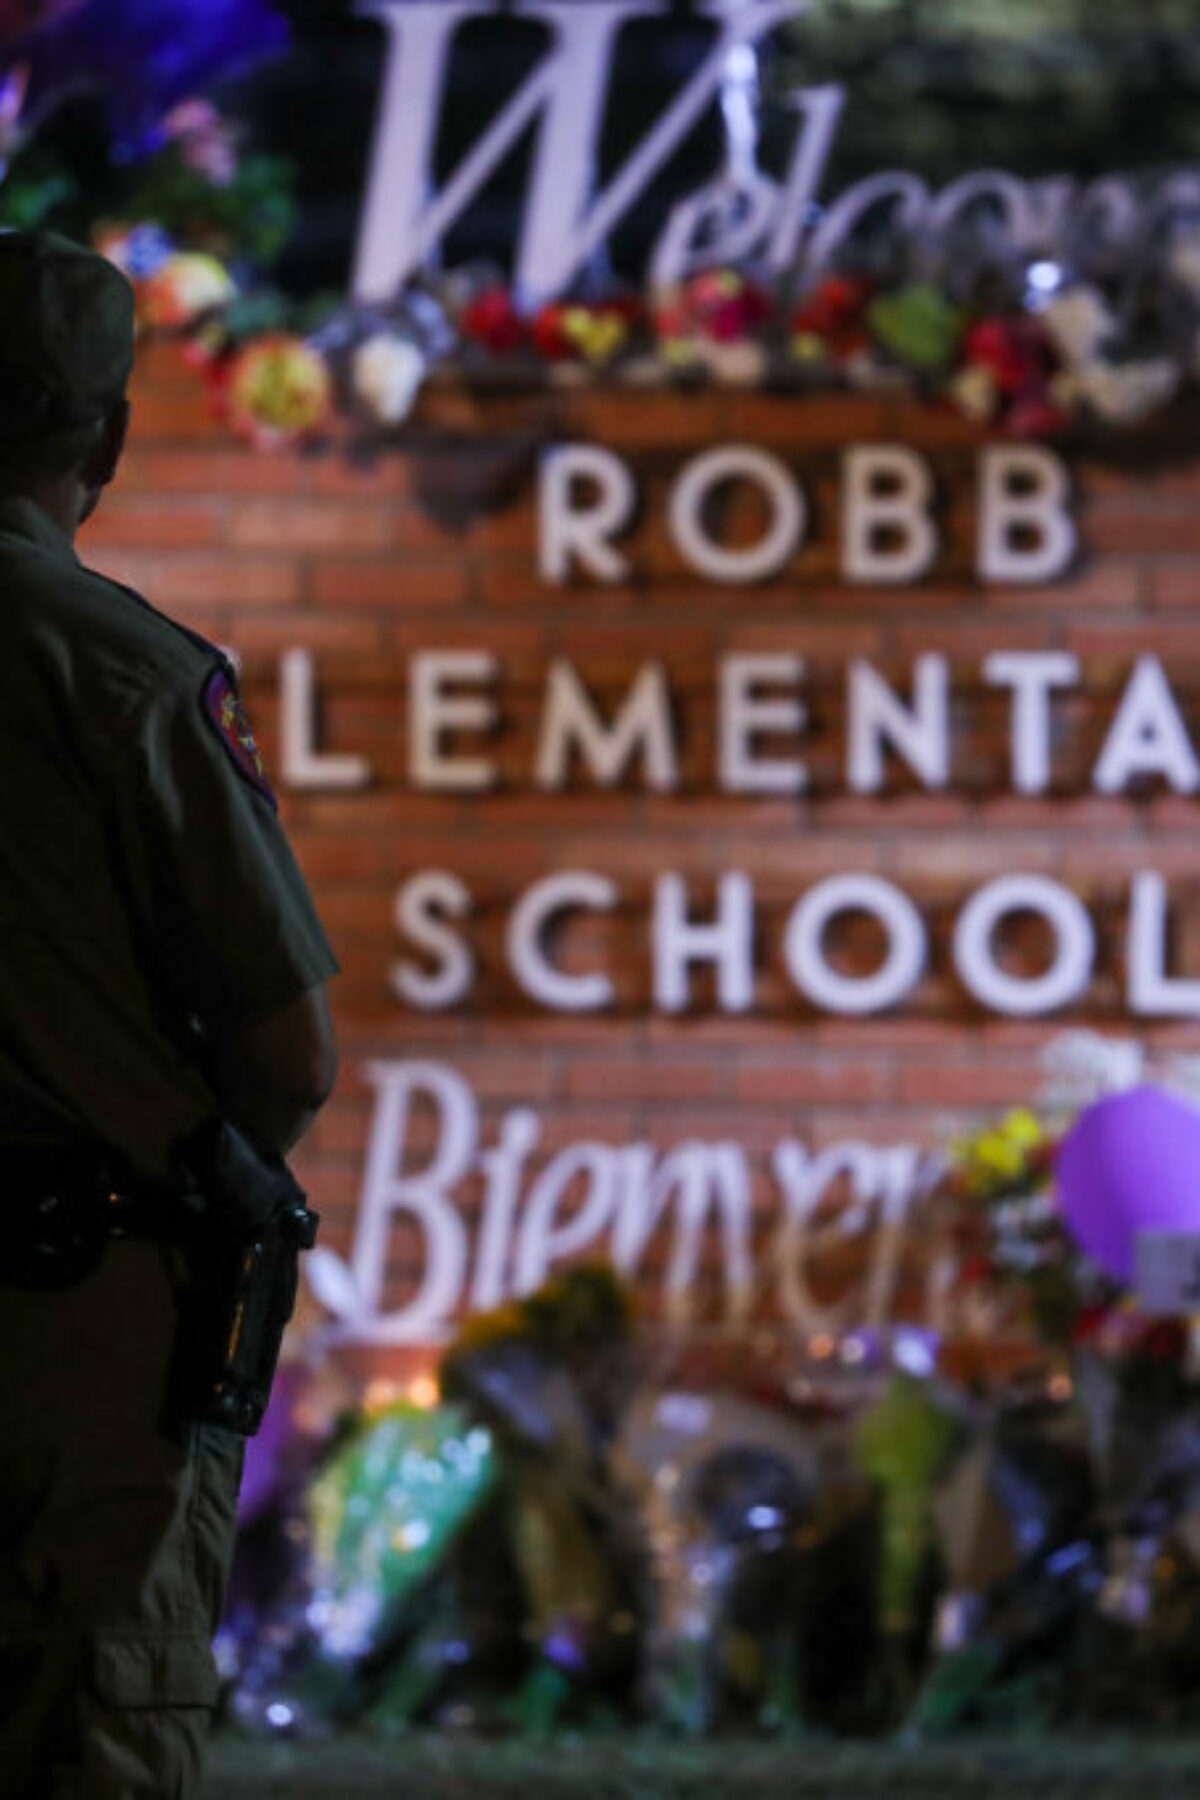 UVALDE,TEXAS, USA - MAY 25:Flowers are placed on a make shift memorial outside Robb Elementary School in Uvalde, Texas, on May 25, 2022. Texas state troopers outside Robb Elementary School 19 students and one teacher were killed during a massacre in a Texas elementary school, the deadliest US school shooting. (Photo by Yasin Ozturk/Anadolu Agency via Getty Images)